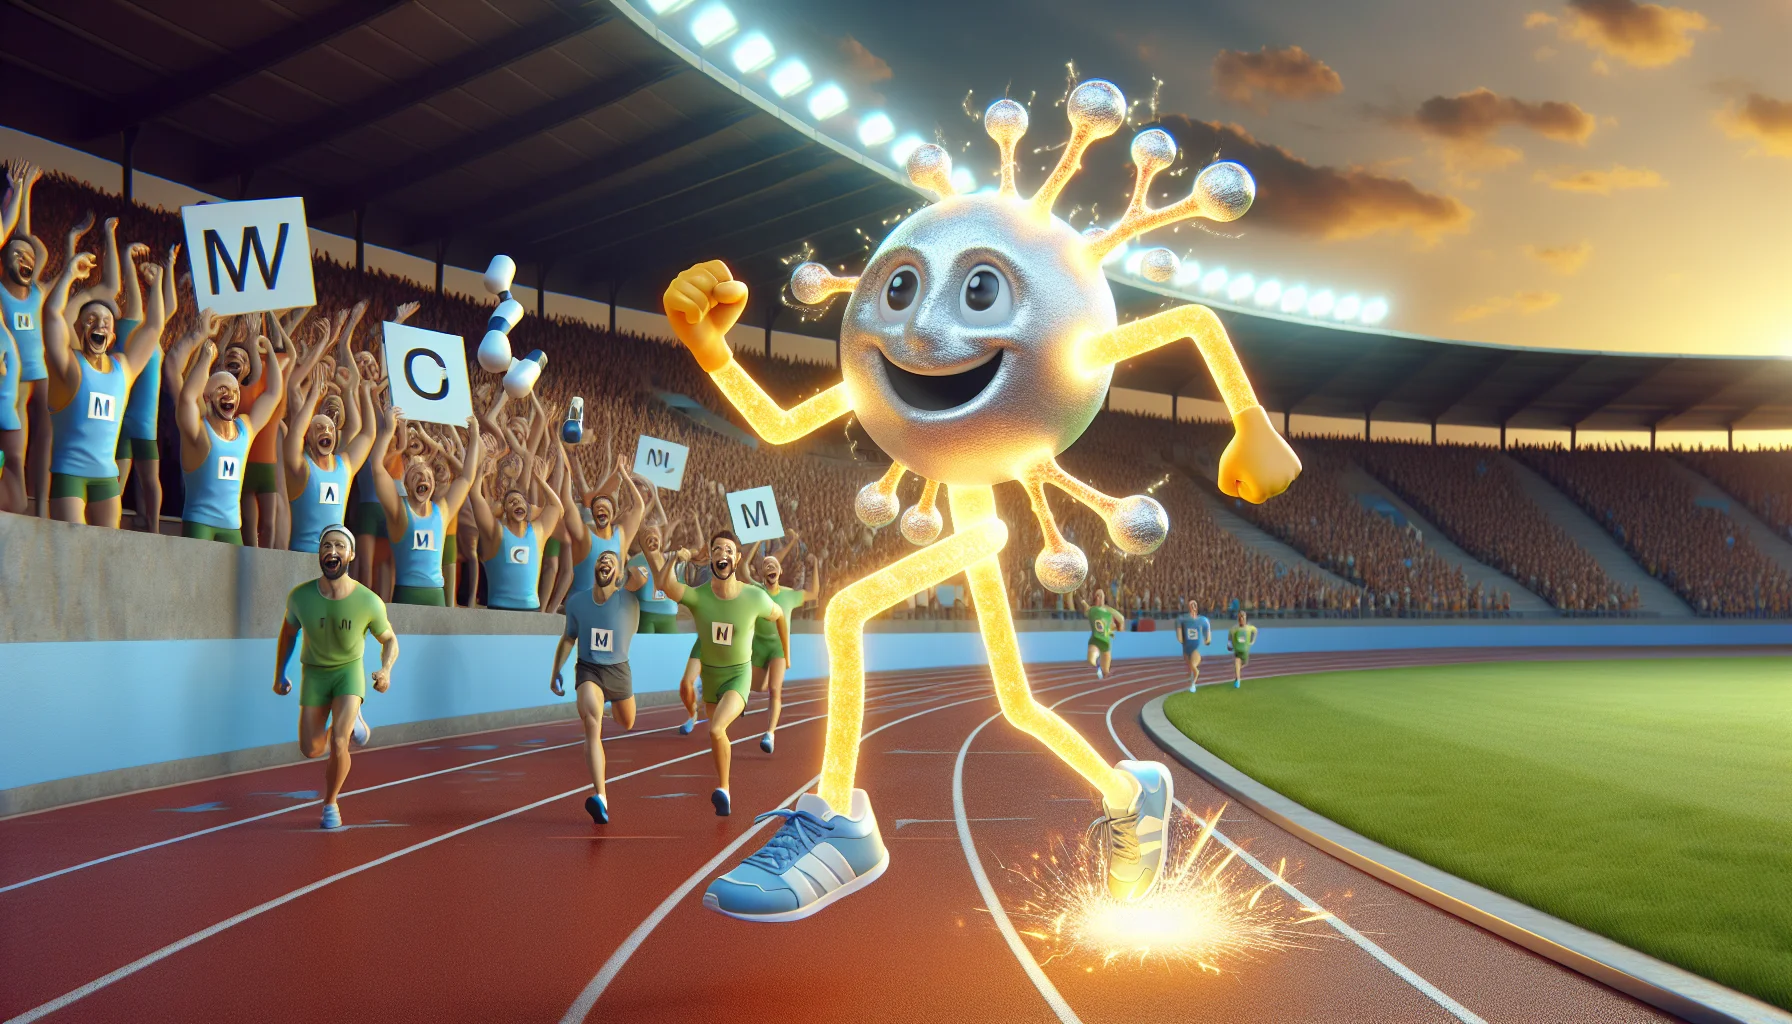 Create a detailed, realistic image of magnesium reacting in a whimsical, sports-themed scenario. It could be a luminescent magnesium character jogging energetically across a track field at dawn, with sparks flying off showcasing its chemical reactivity. Behind the character, an audience composed of various electrolyte and vitamin spectators, like calcium and vitamin C, cheer on in excitement, symbolizing the helpfulness of supplements for athletic performance. The scene should be invigorating and comical, aimed at promoting the idea of using supplements for sports.